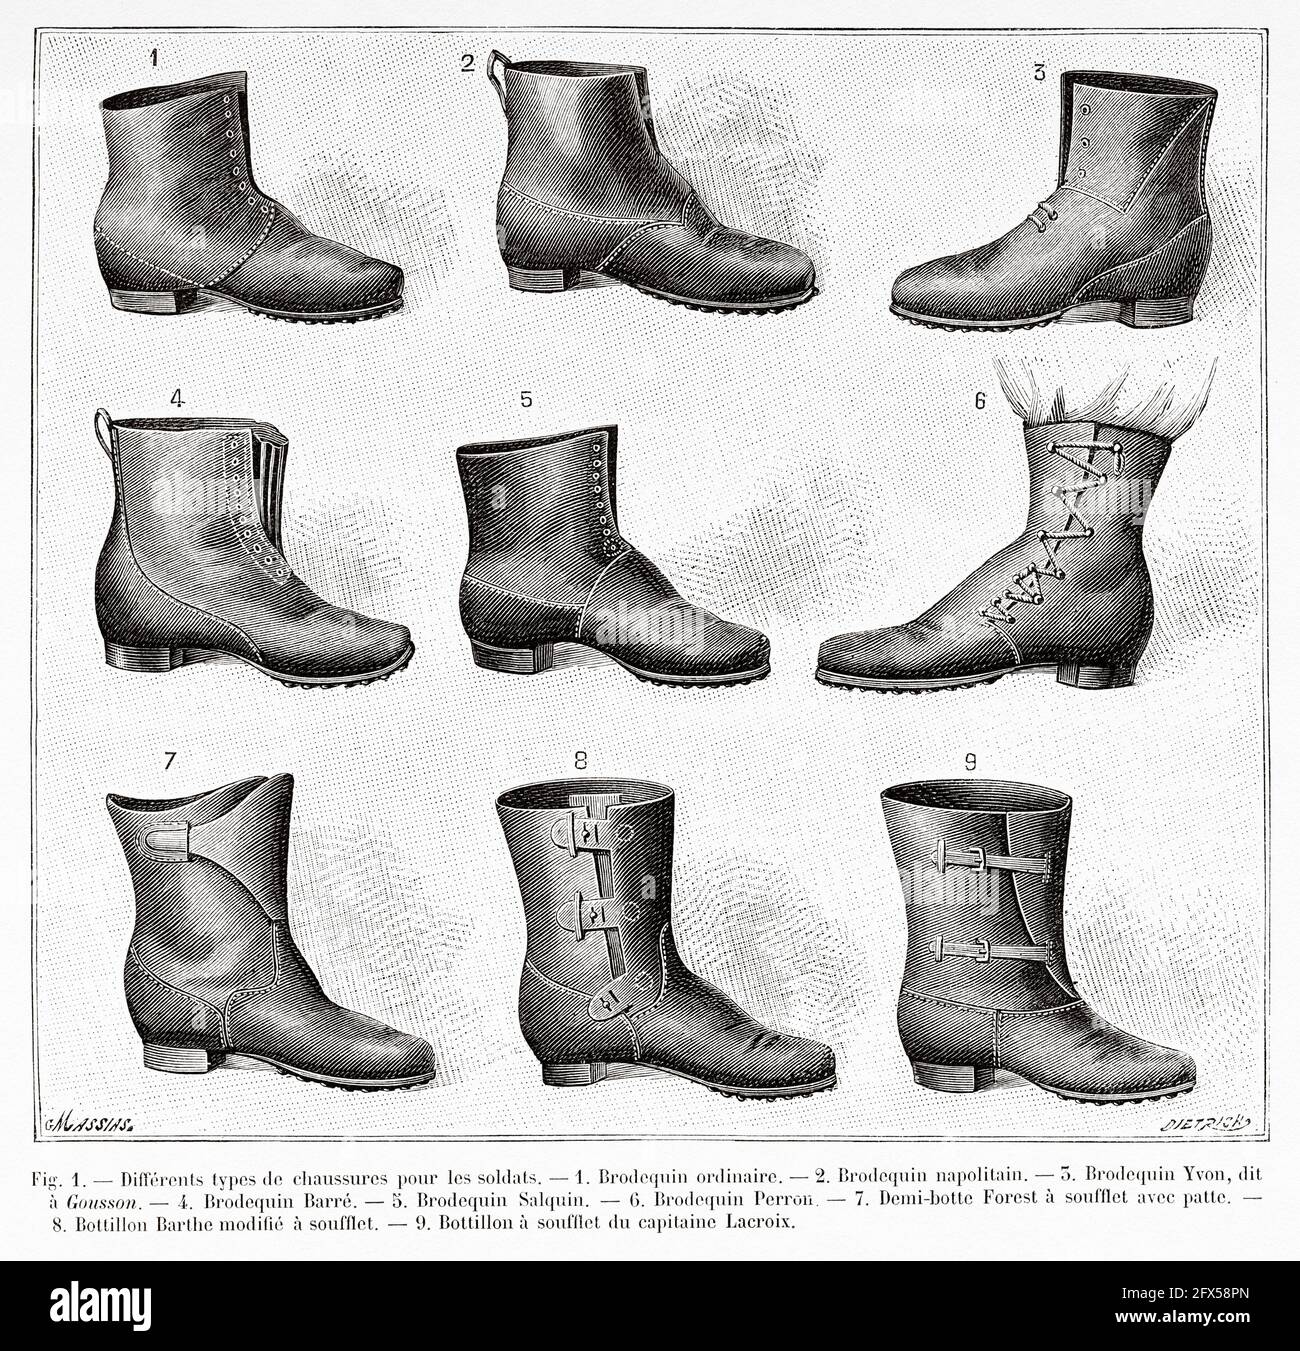 Different types of shoes for soldiers. Old 19th century engraved  illustration from La Nature 1893 Stock Photo - Alamy